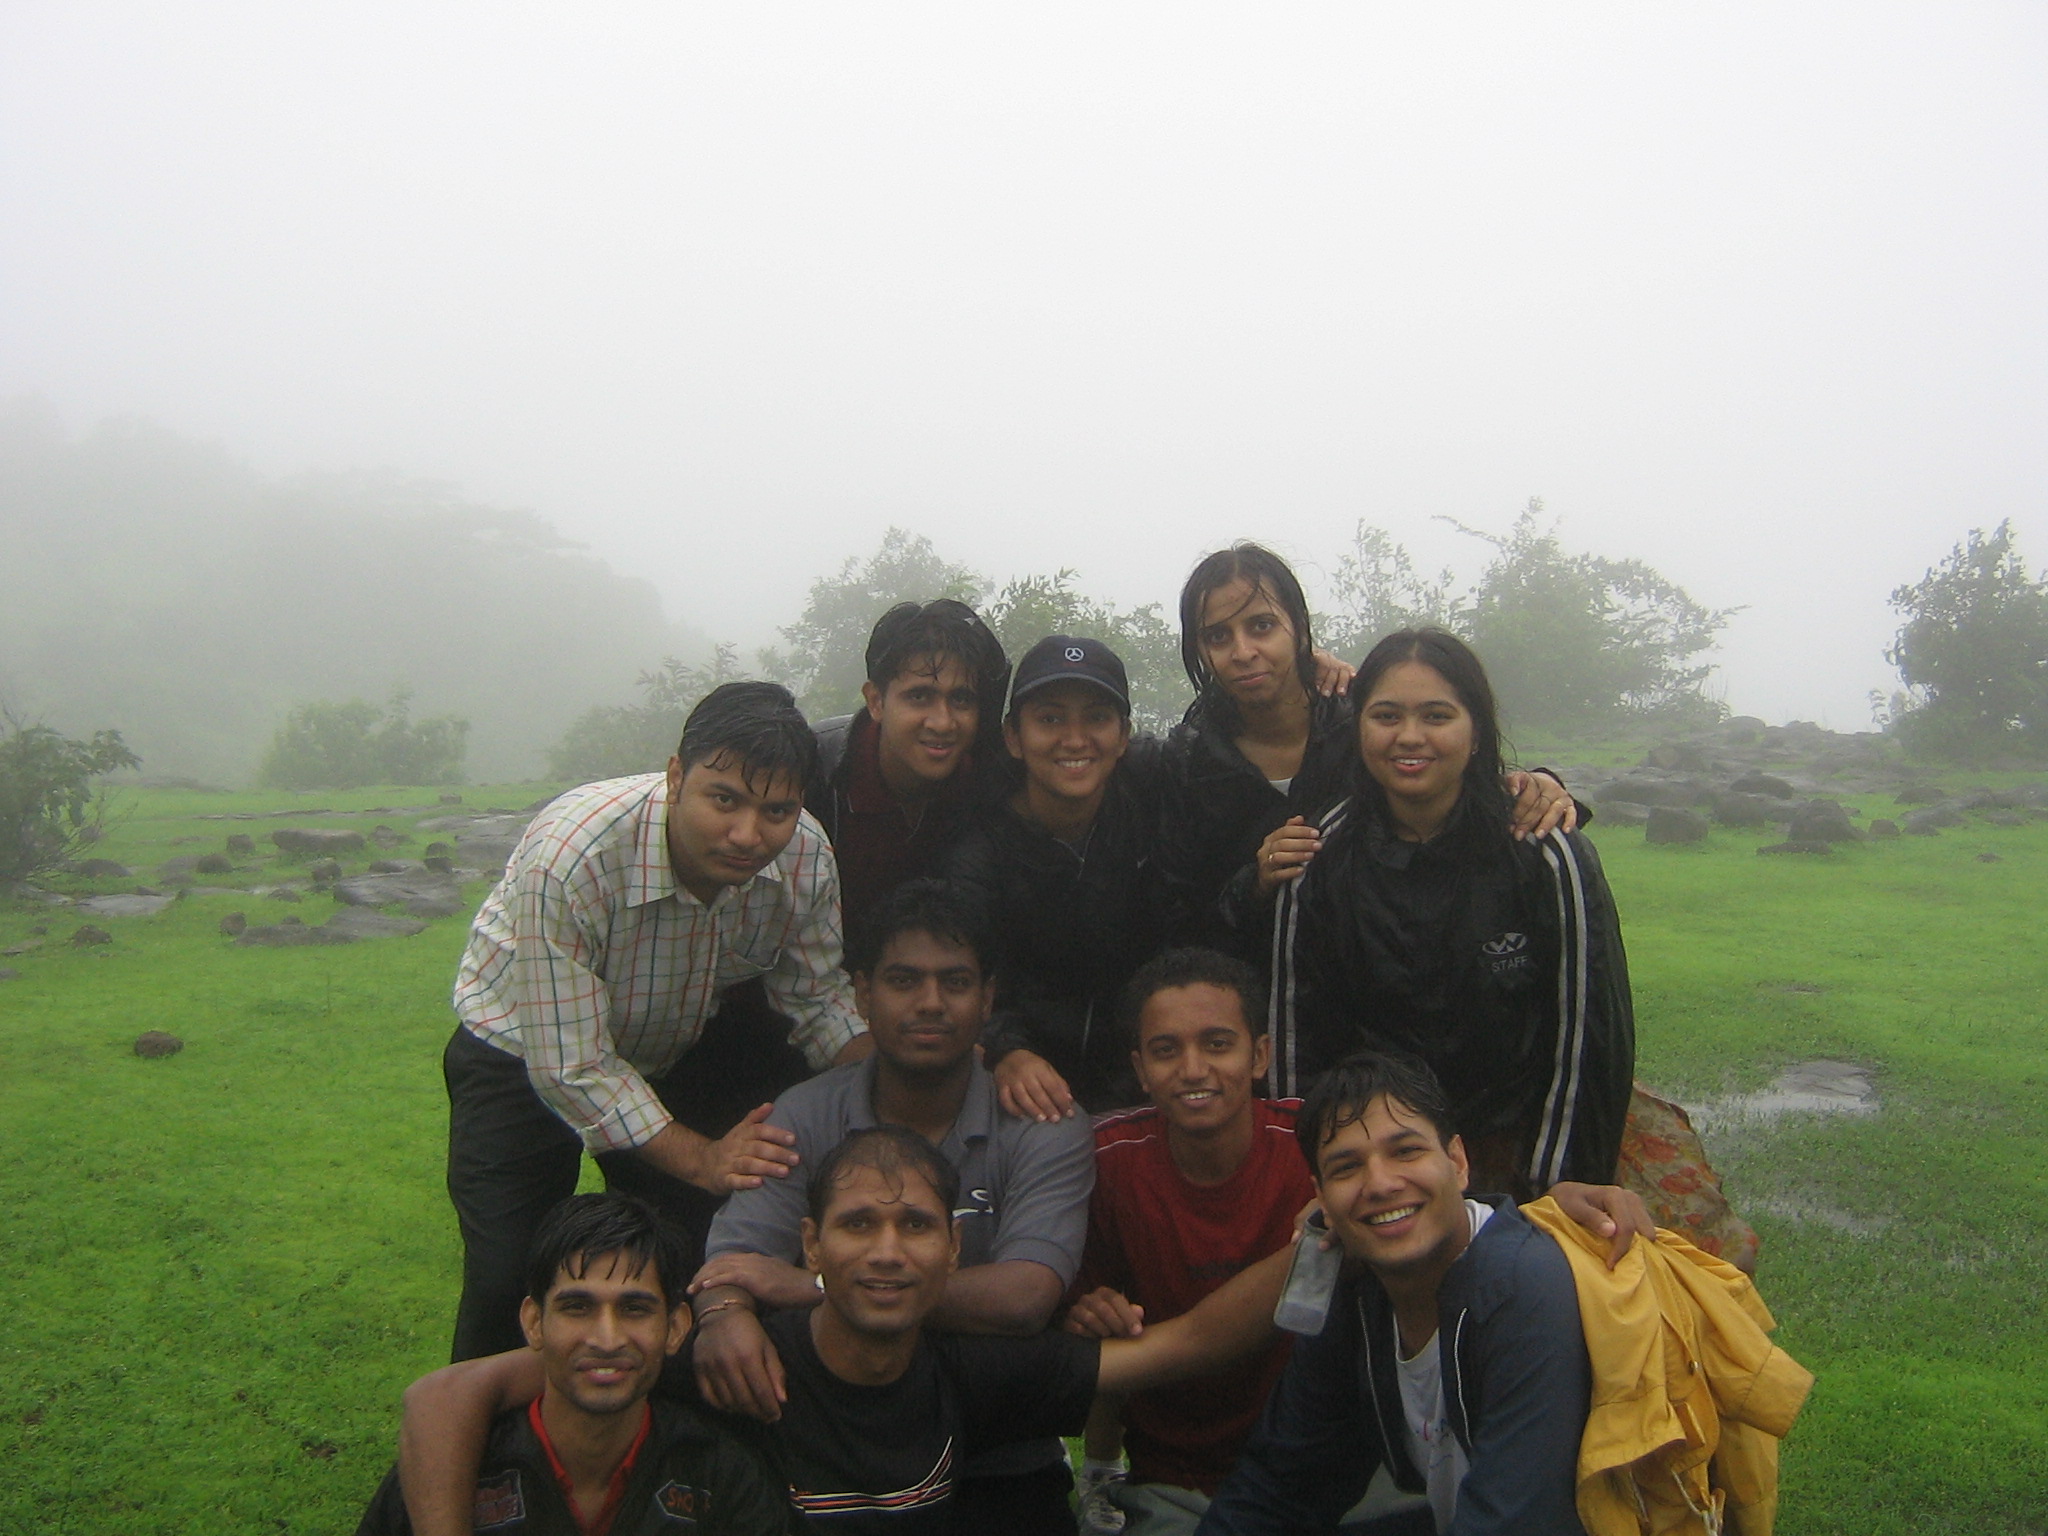 group of people posing in the middle of a foggy field